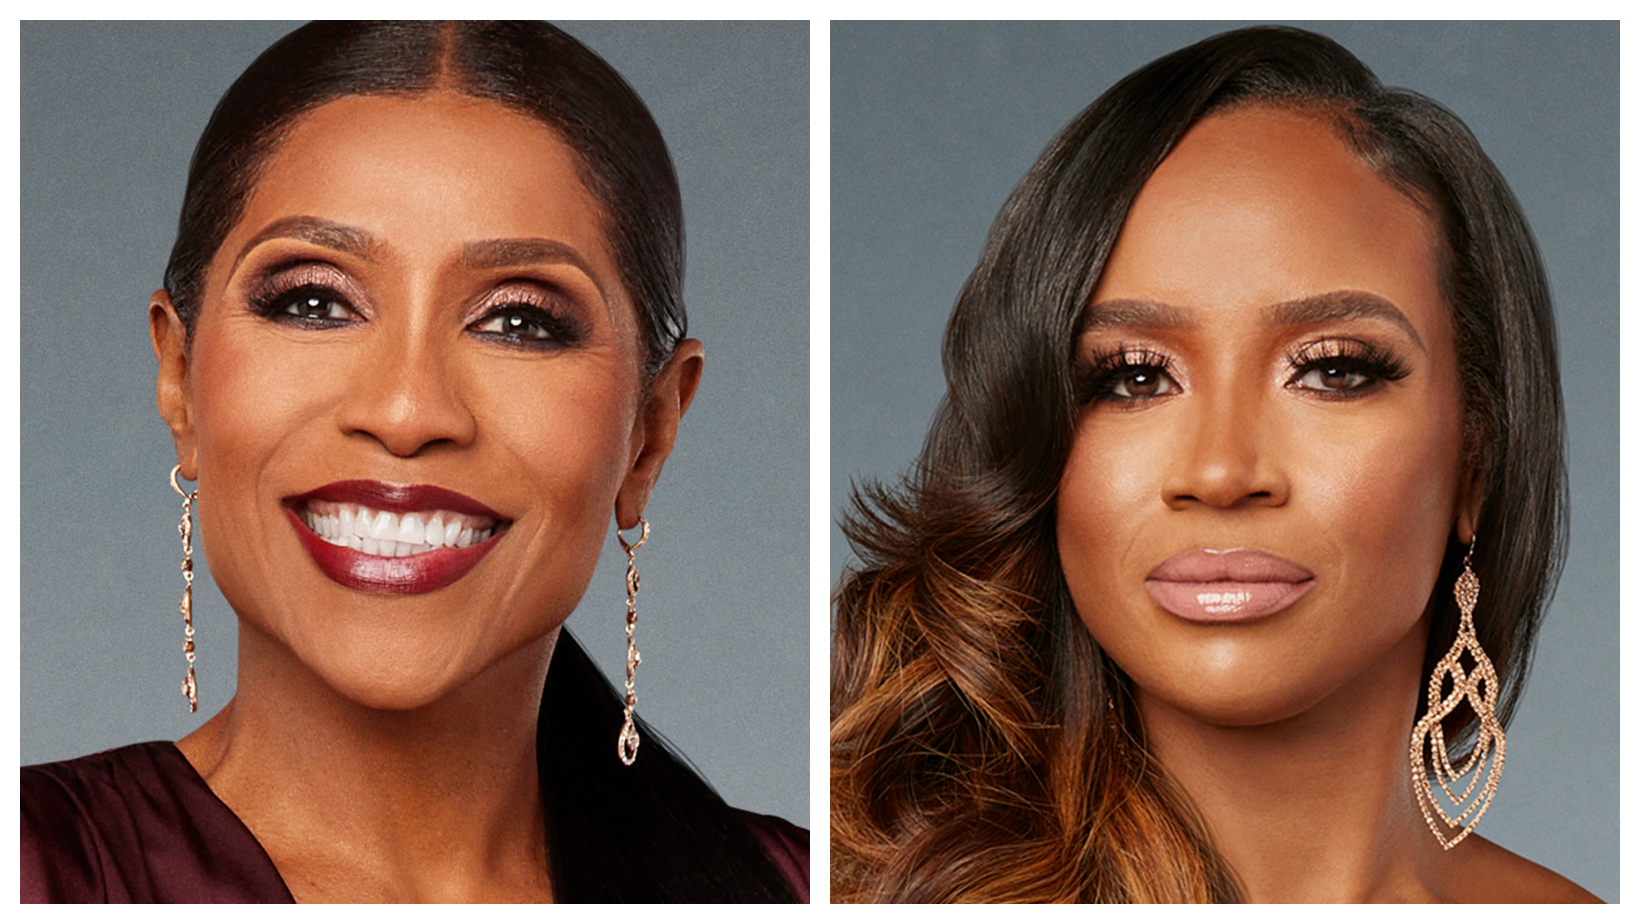 Answering The Call: Bravo’s Dr. Jackie and Dr. Contessa Talk Shifting The Representation of Black Career Women On Reality TV